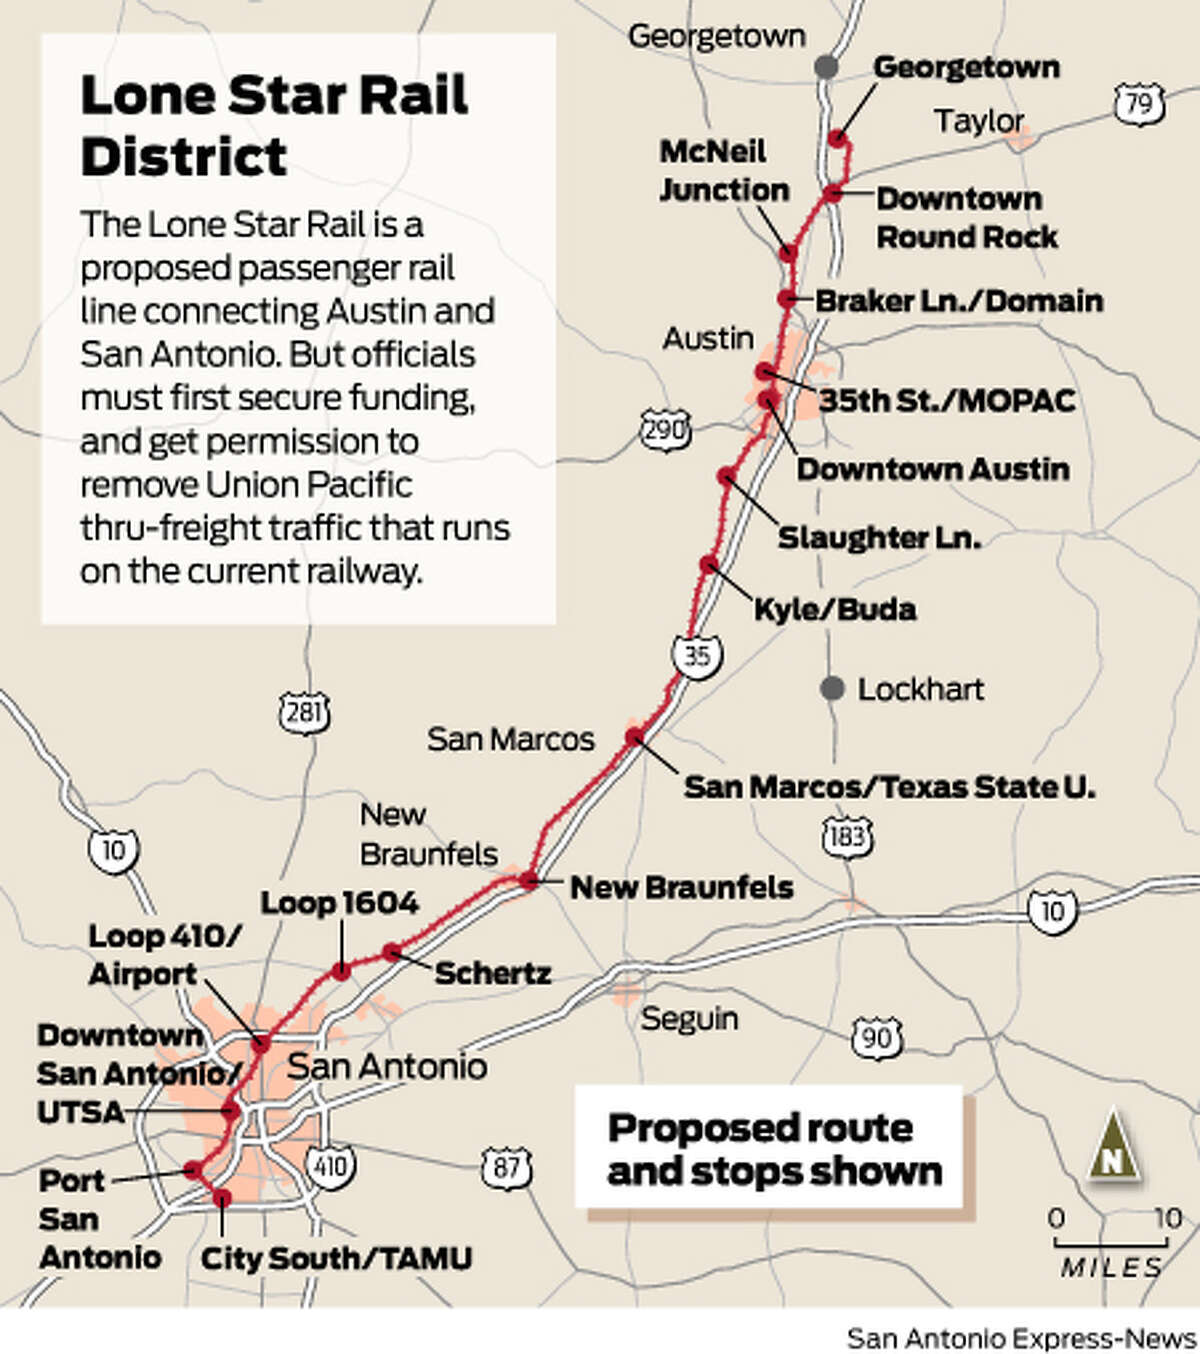 The Lone Star Rail is a proposed passenger rail line connecting Austin and San Antonio. But officials must first secure funding, and get permission to remove Union Pacific thru-freight traffic that runs on the current railway.